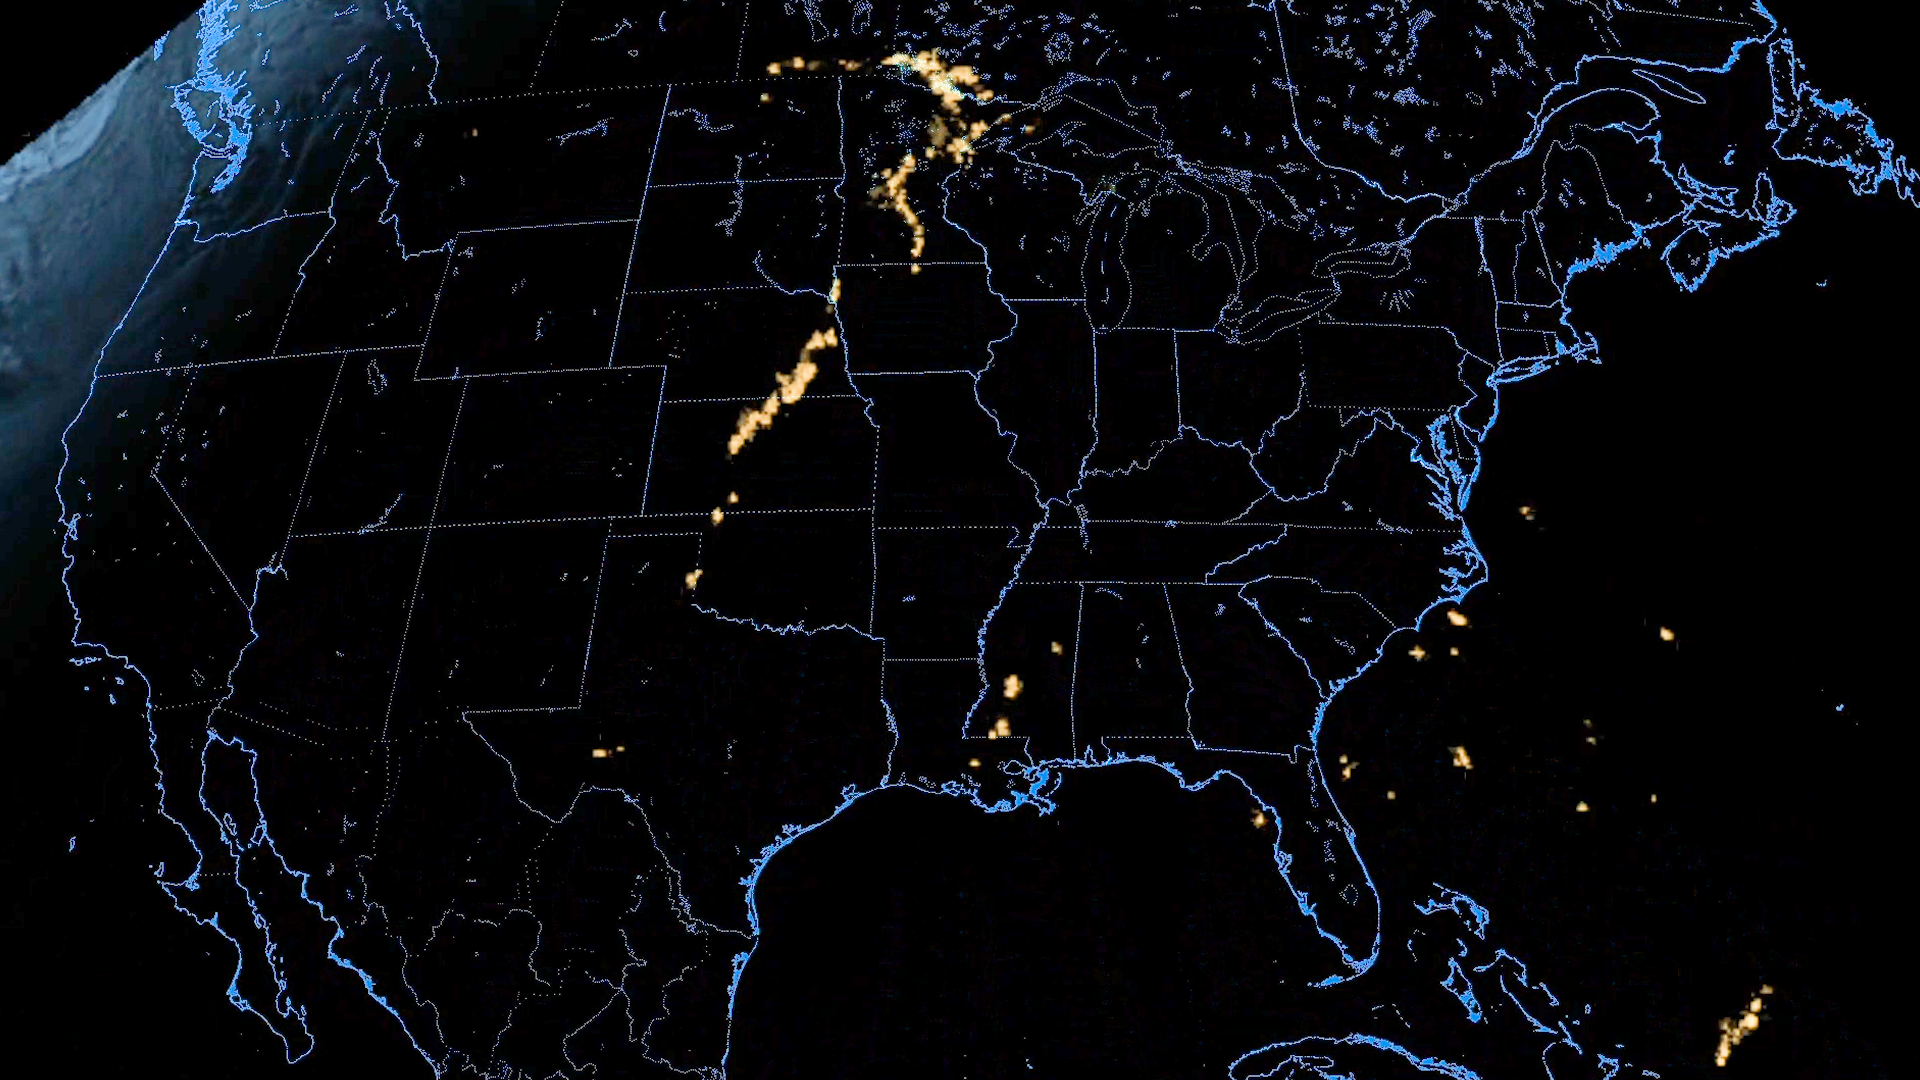 NOAA Shares Flashy First Imagery from GOES-18 Lightning Mapper